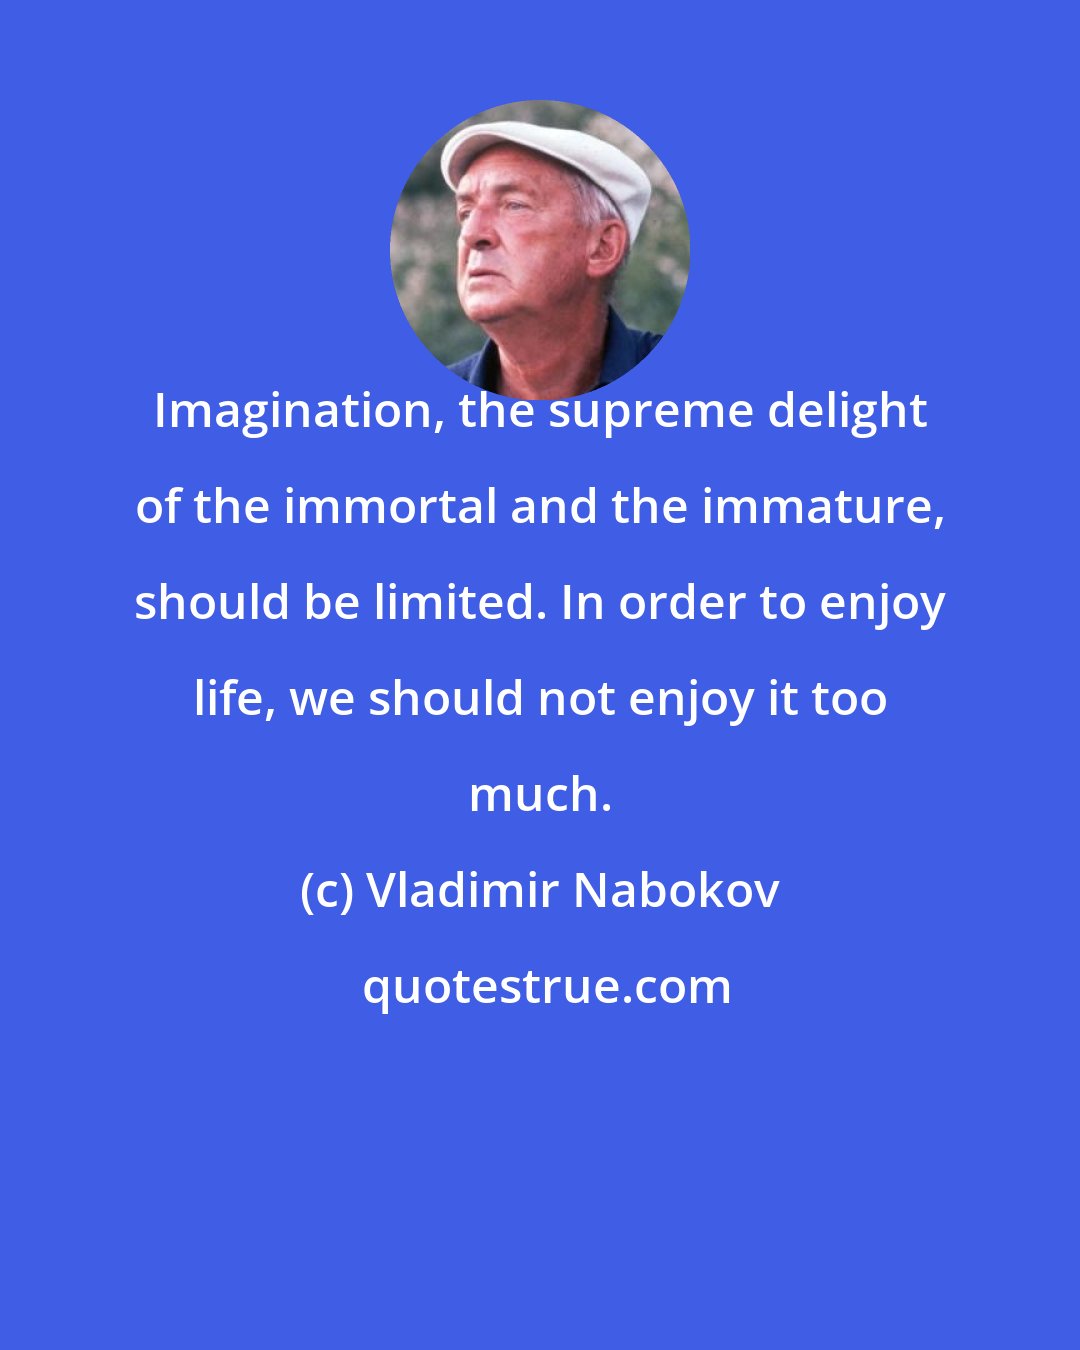 Vladimir Nabokov: Imagination, the supreme delight of the immortal and the immature, should be limited. In order to enjoy life, we should not enjoy it too much.